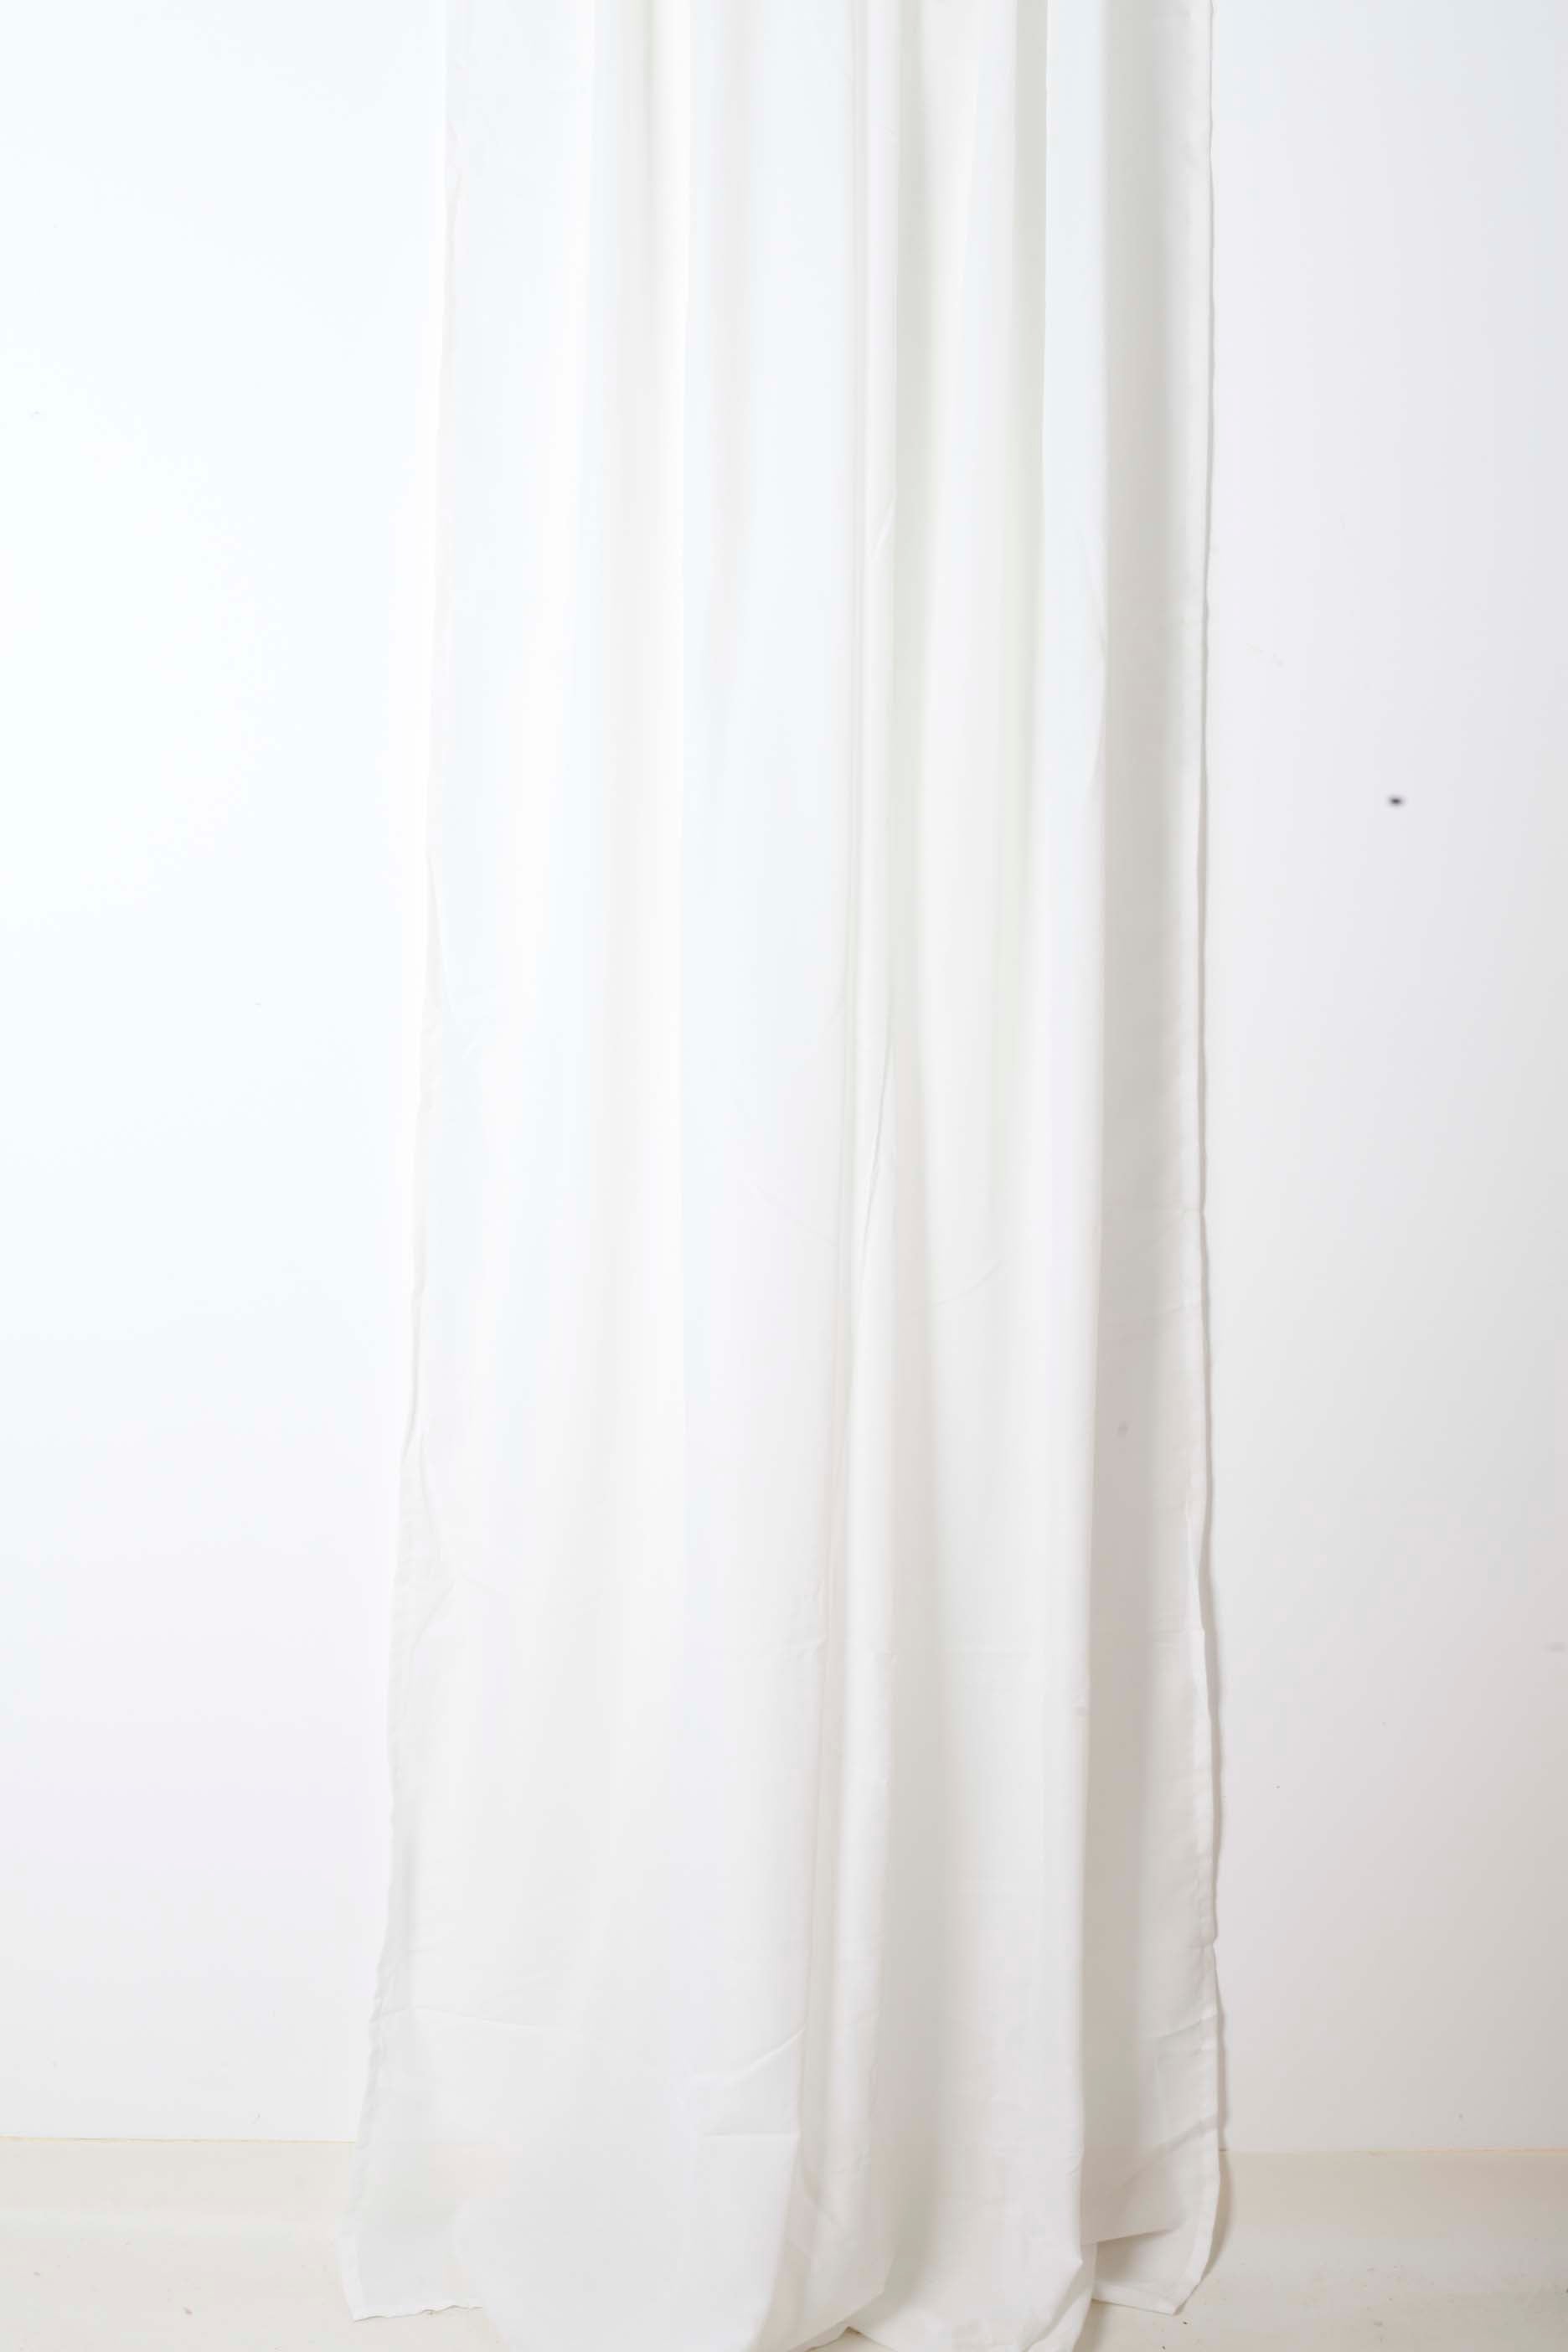 Soft White Sheer Curtains - Multi Sizes available